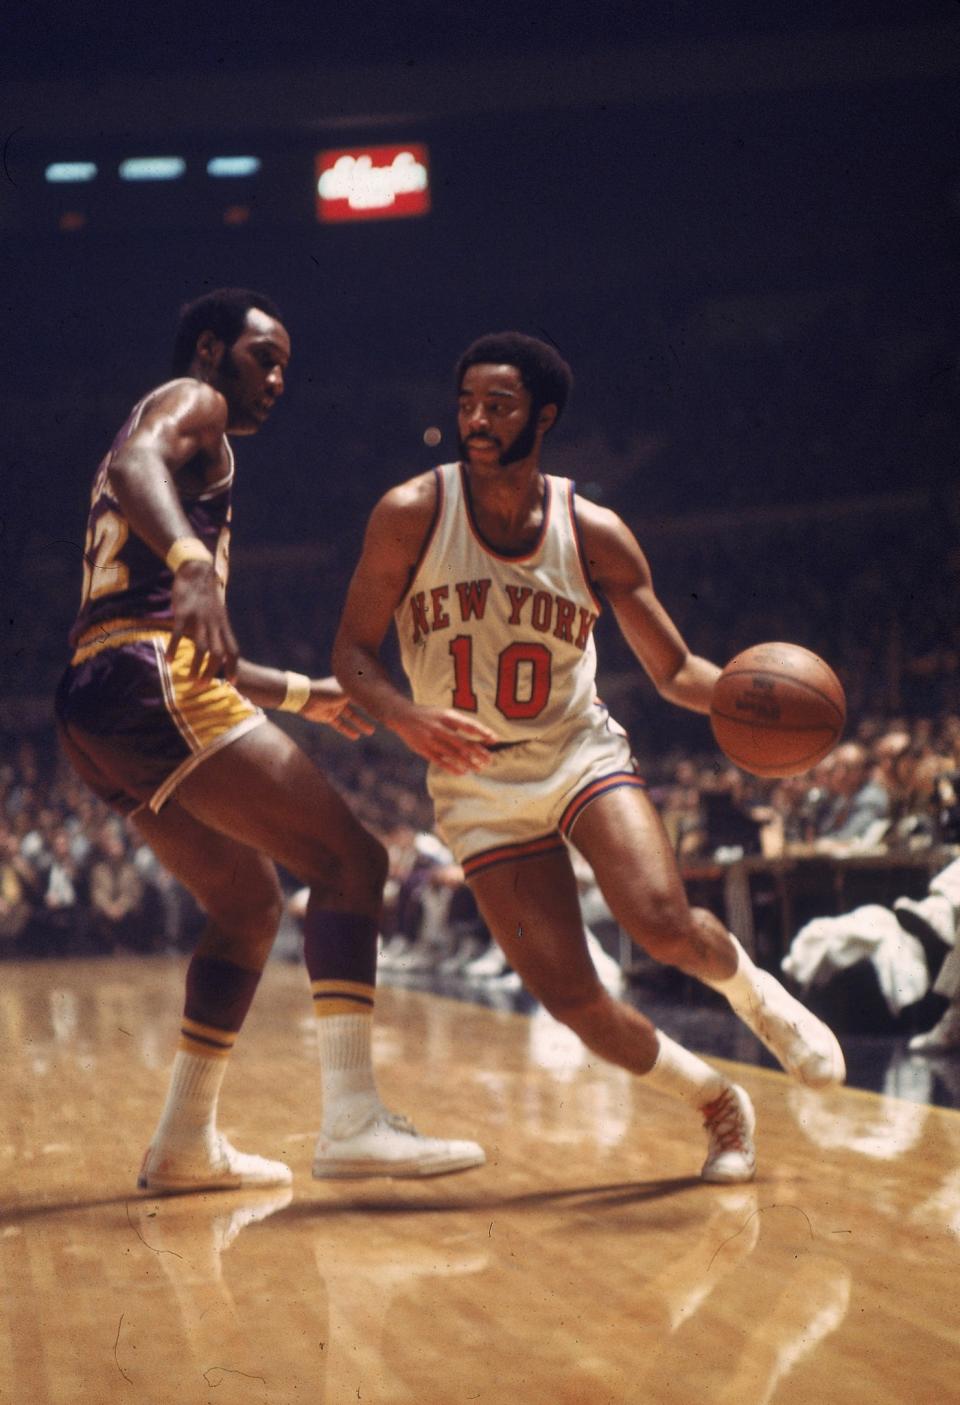 Walt Frazier drives to the basket at Madison Square Garden in 1973. (AP)